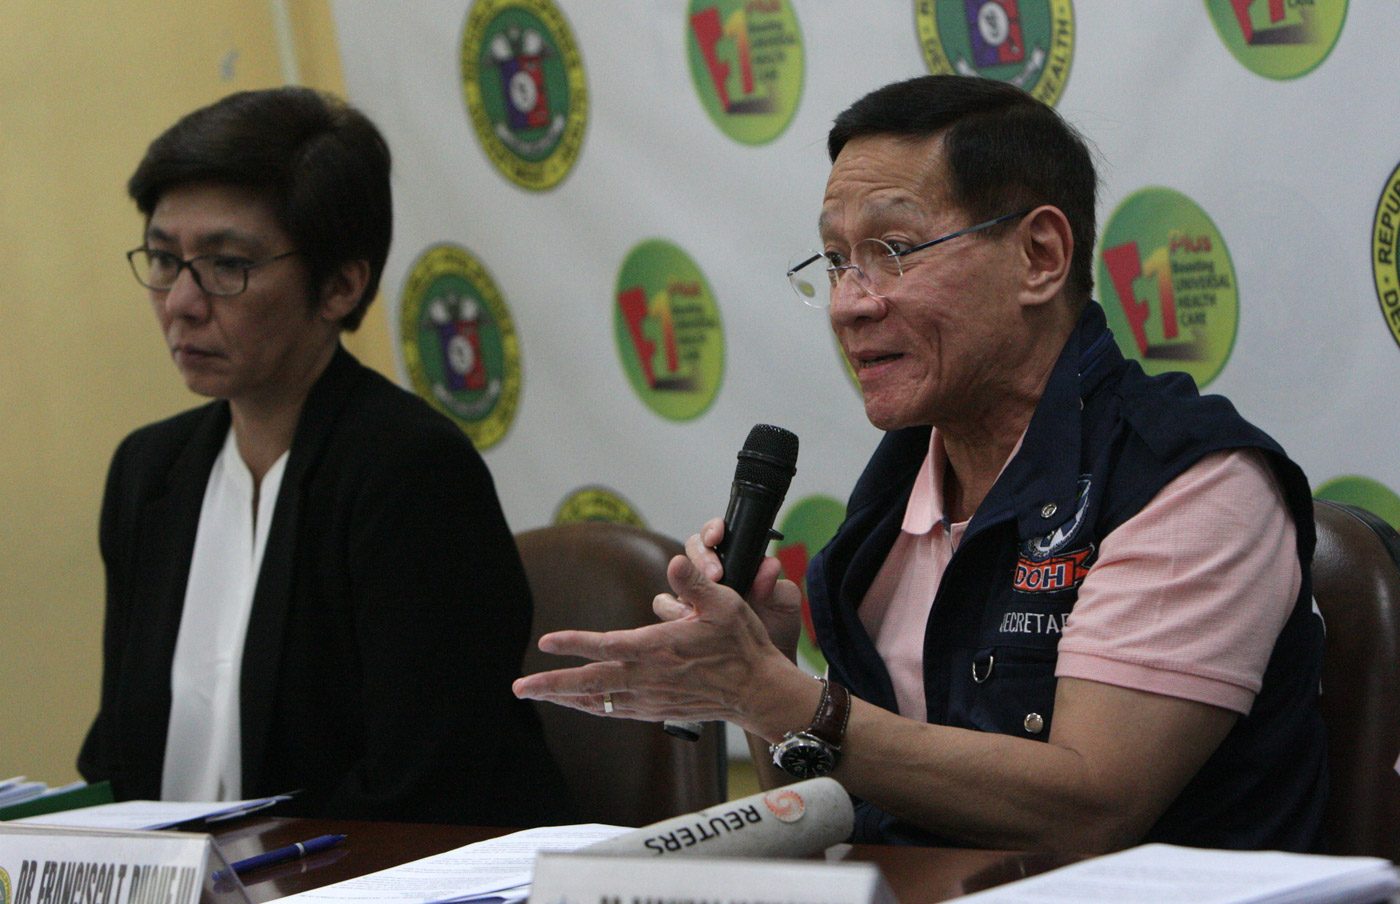 VIP treatment in coronavirus testing not a policy, says DOH